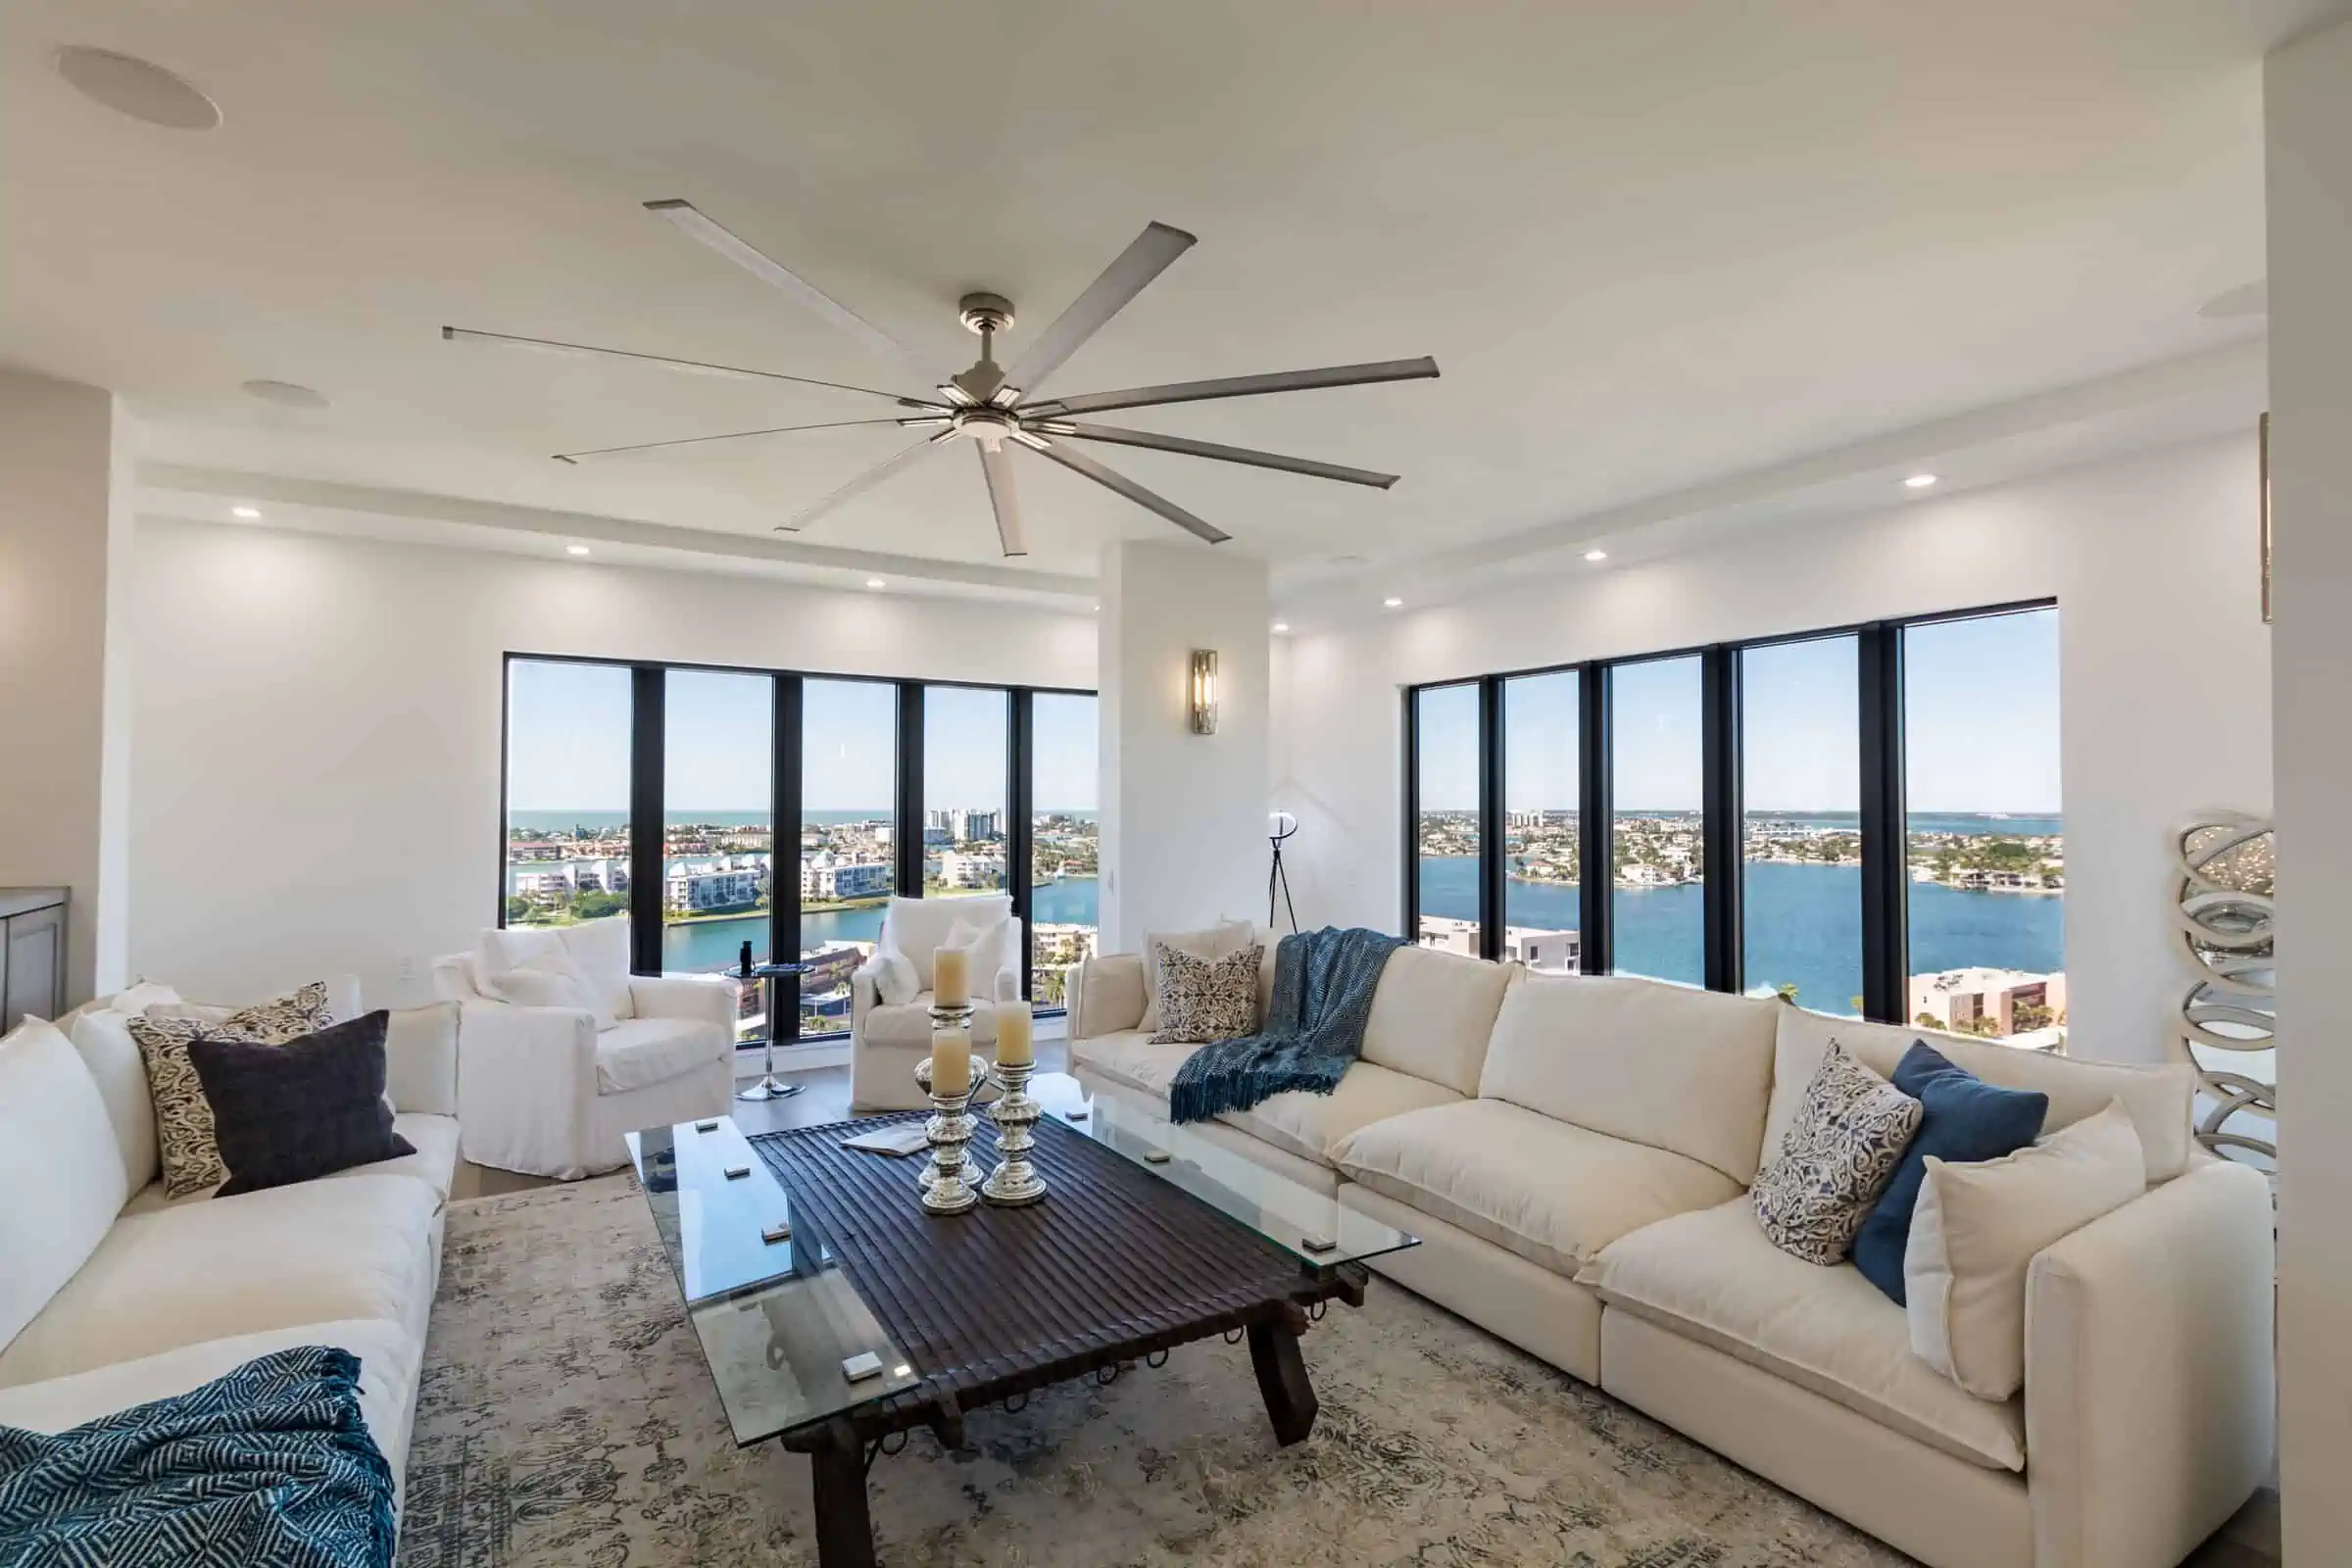 Condo Remodel in St Petersburg with Living Room Water View